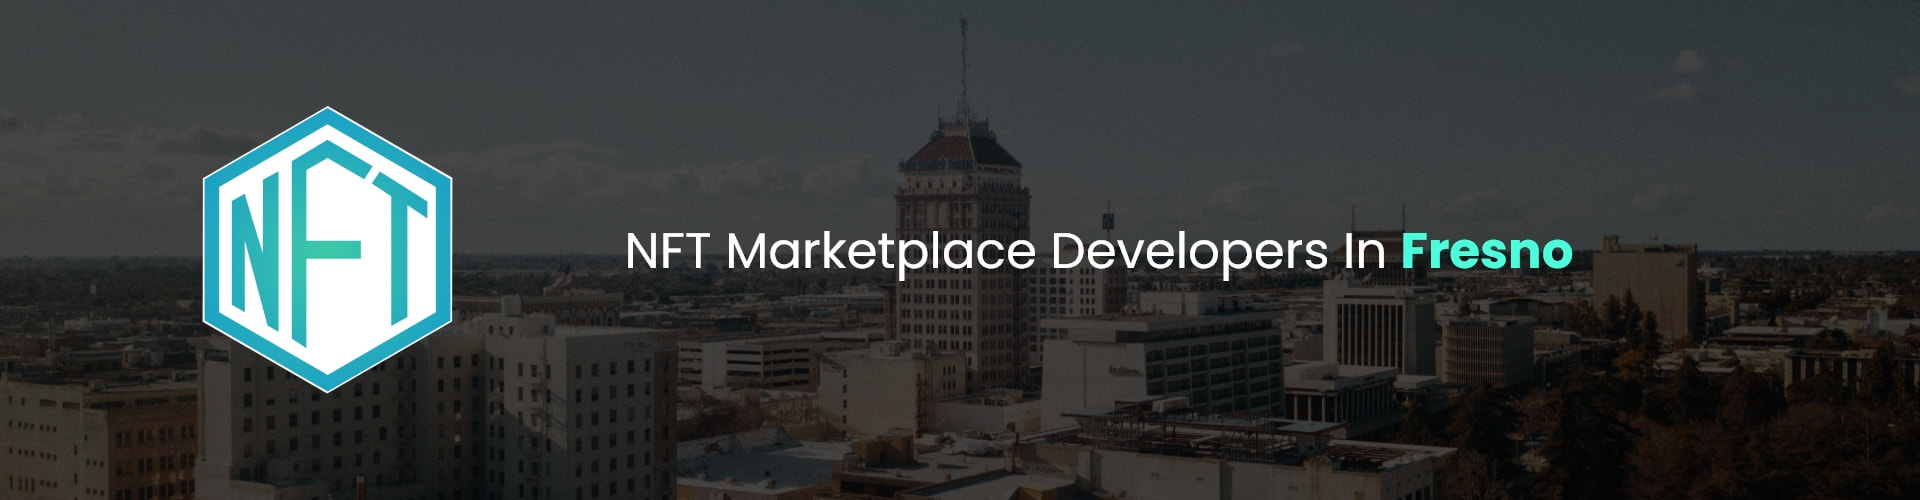 hire nft marketplace developers in fresno